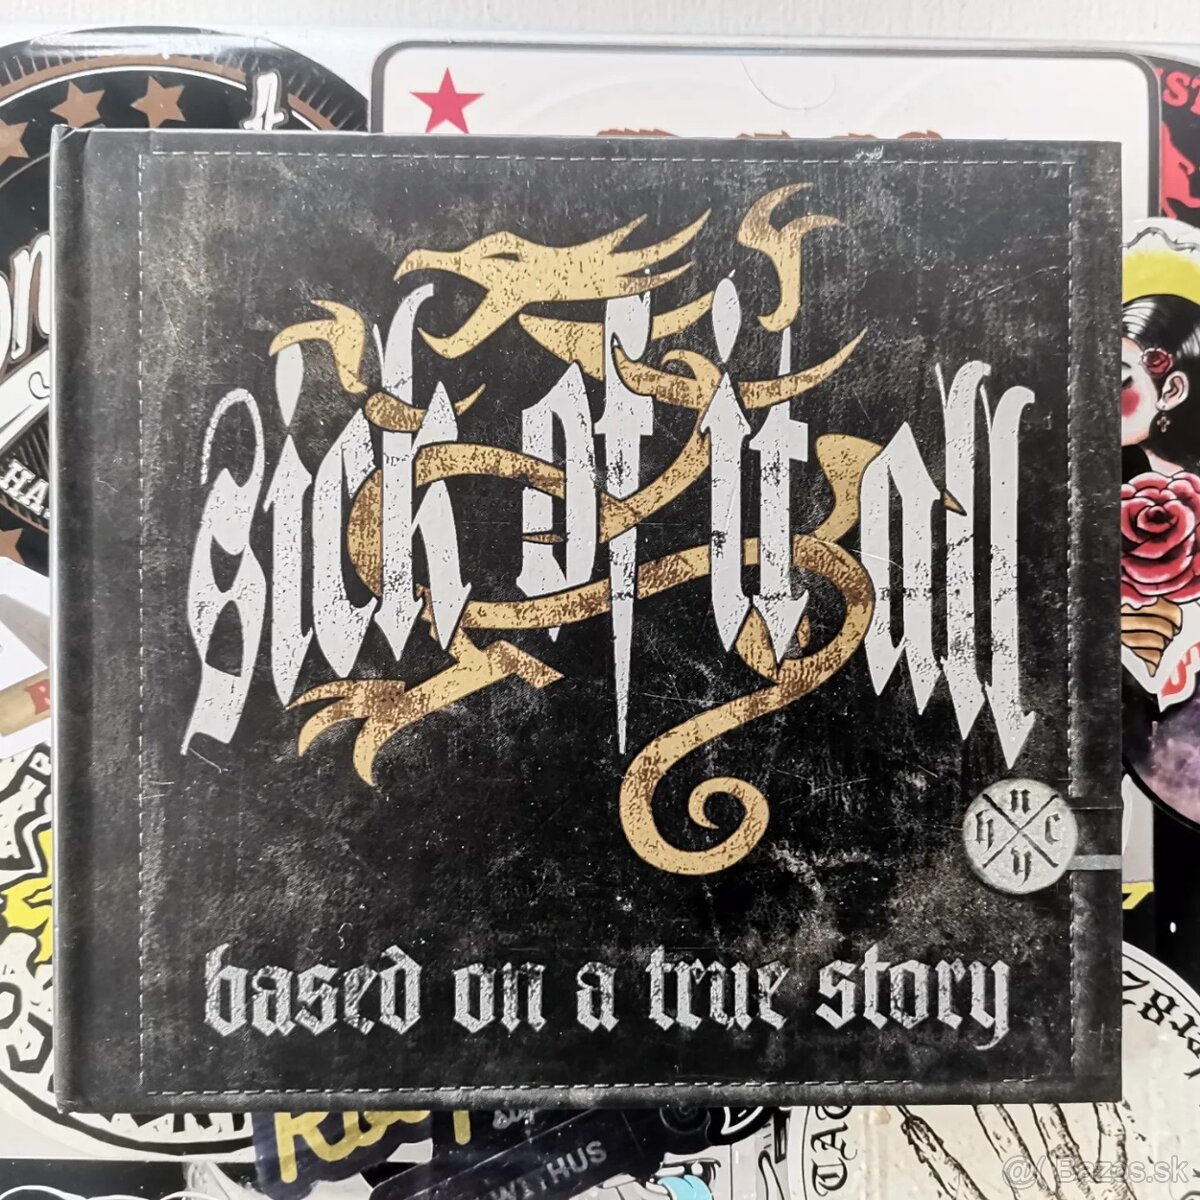 Cd+dvd Sick Of Ot All - Based On A True Story